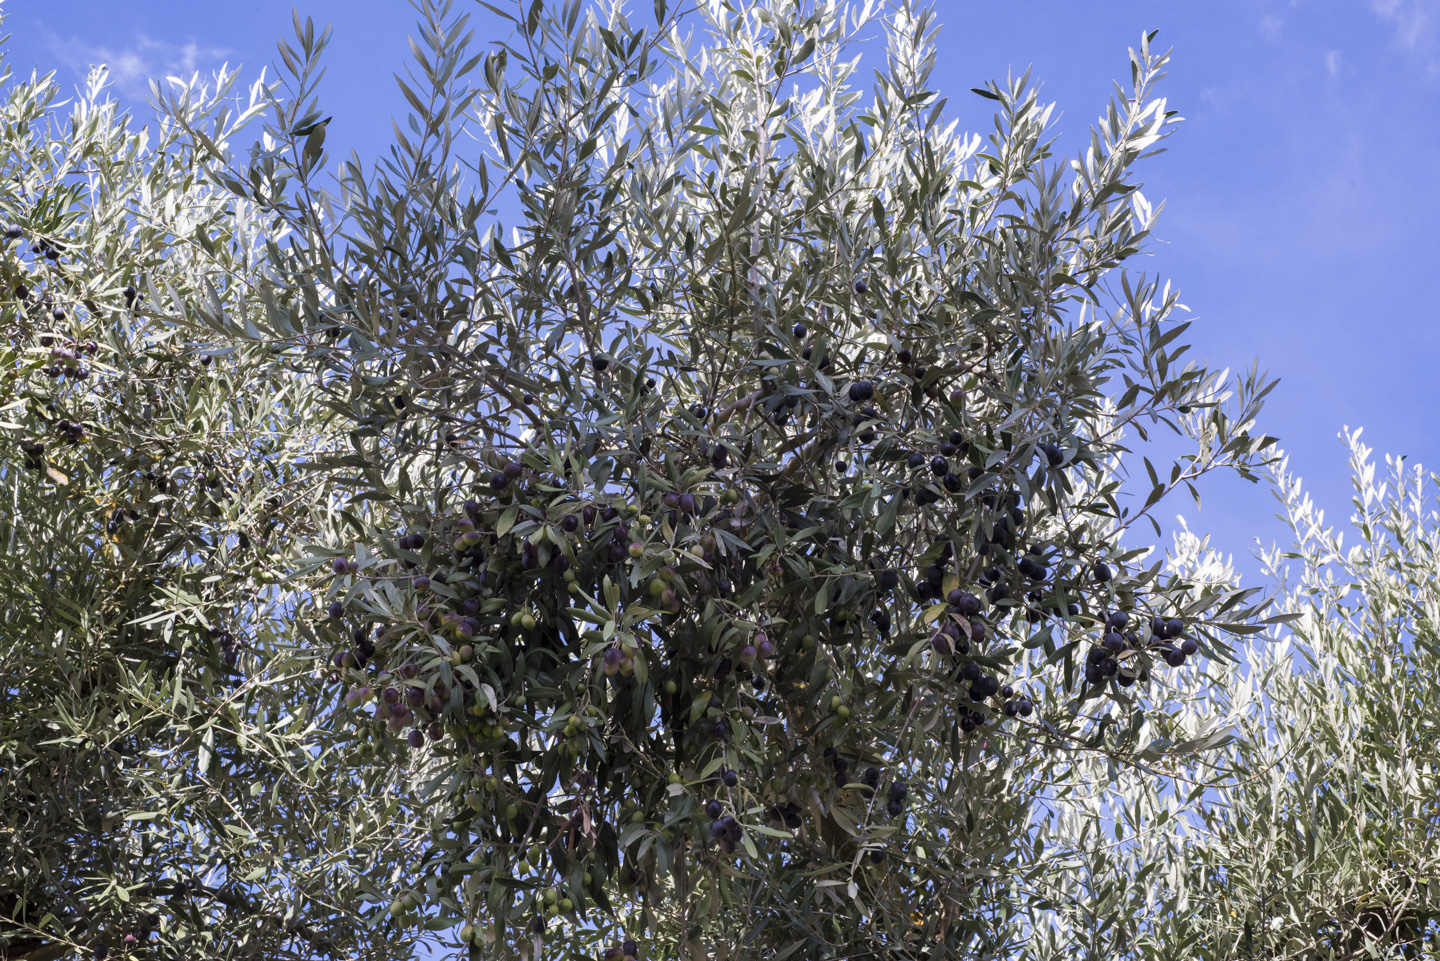 An olive tree branch loaded with olives